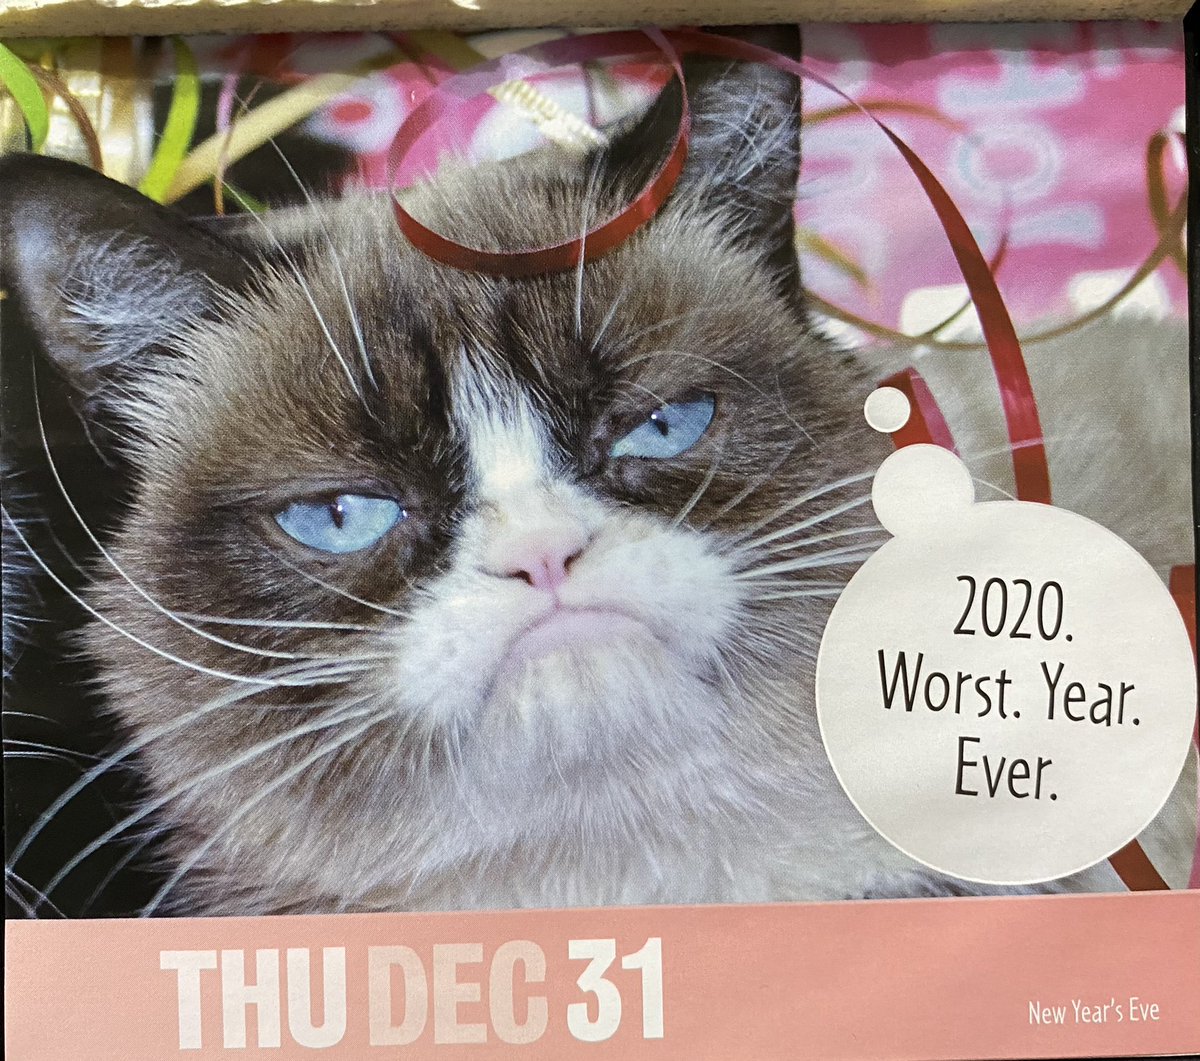 The last page of my #2020calendar thank your #grumpycat @RealGrumpyCat  for the perfect 👌 and fitting desk calendar 💞
#NewYearsEve #2020worstyear #2021makeawish #GoodBye2020